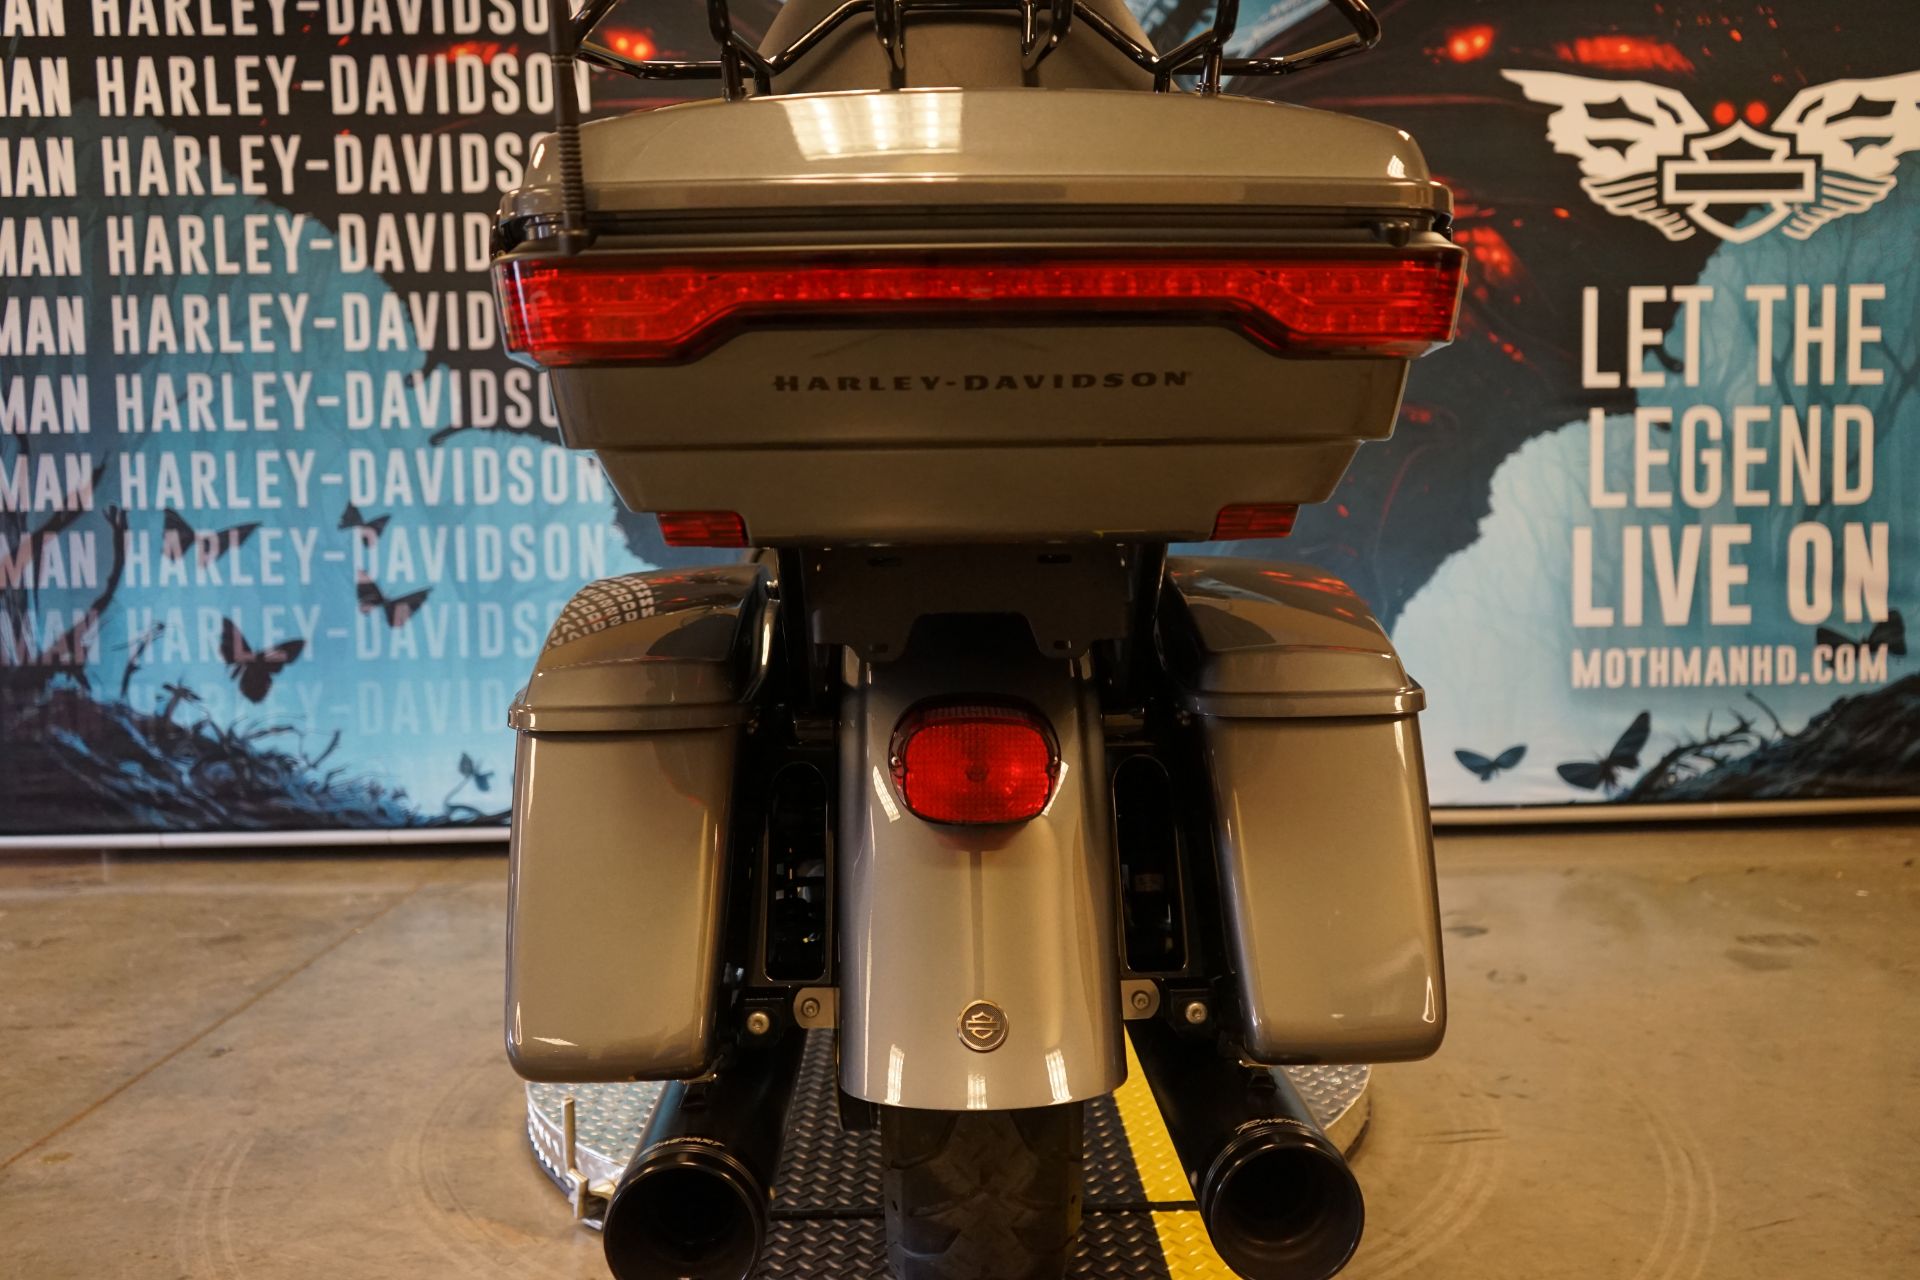 2021 Harley-Davidson Ultra Limited in Williamstown, West Virginia - Photo 3